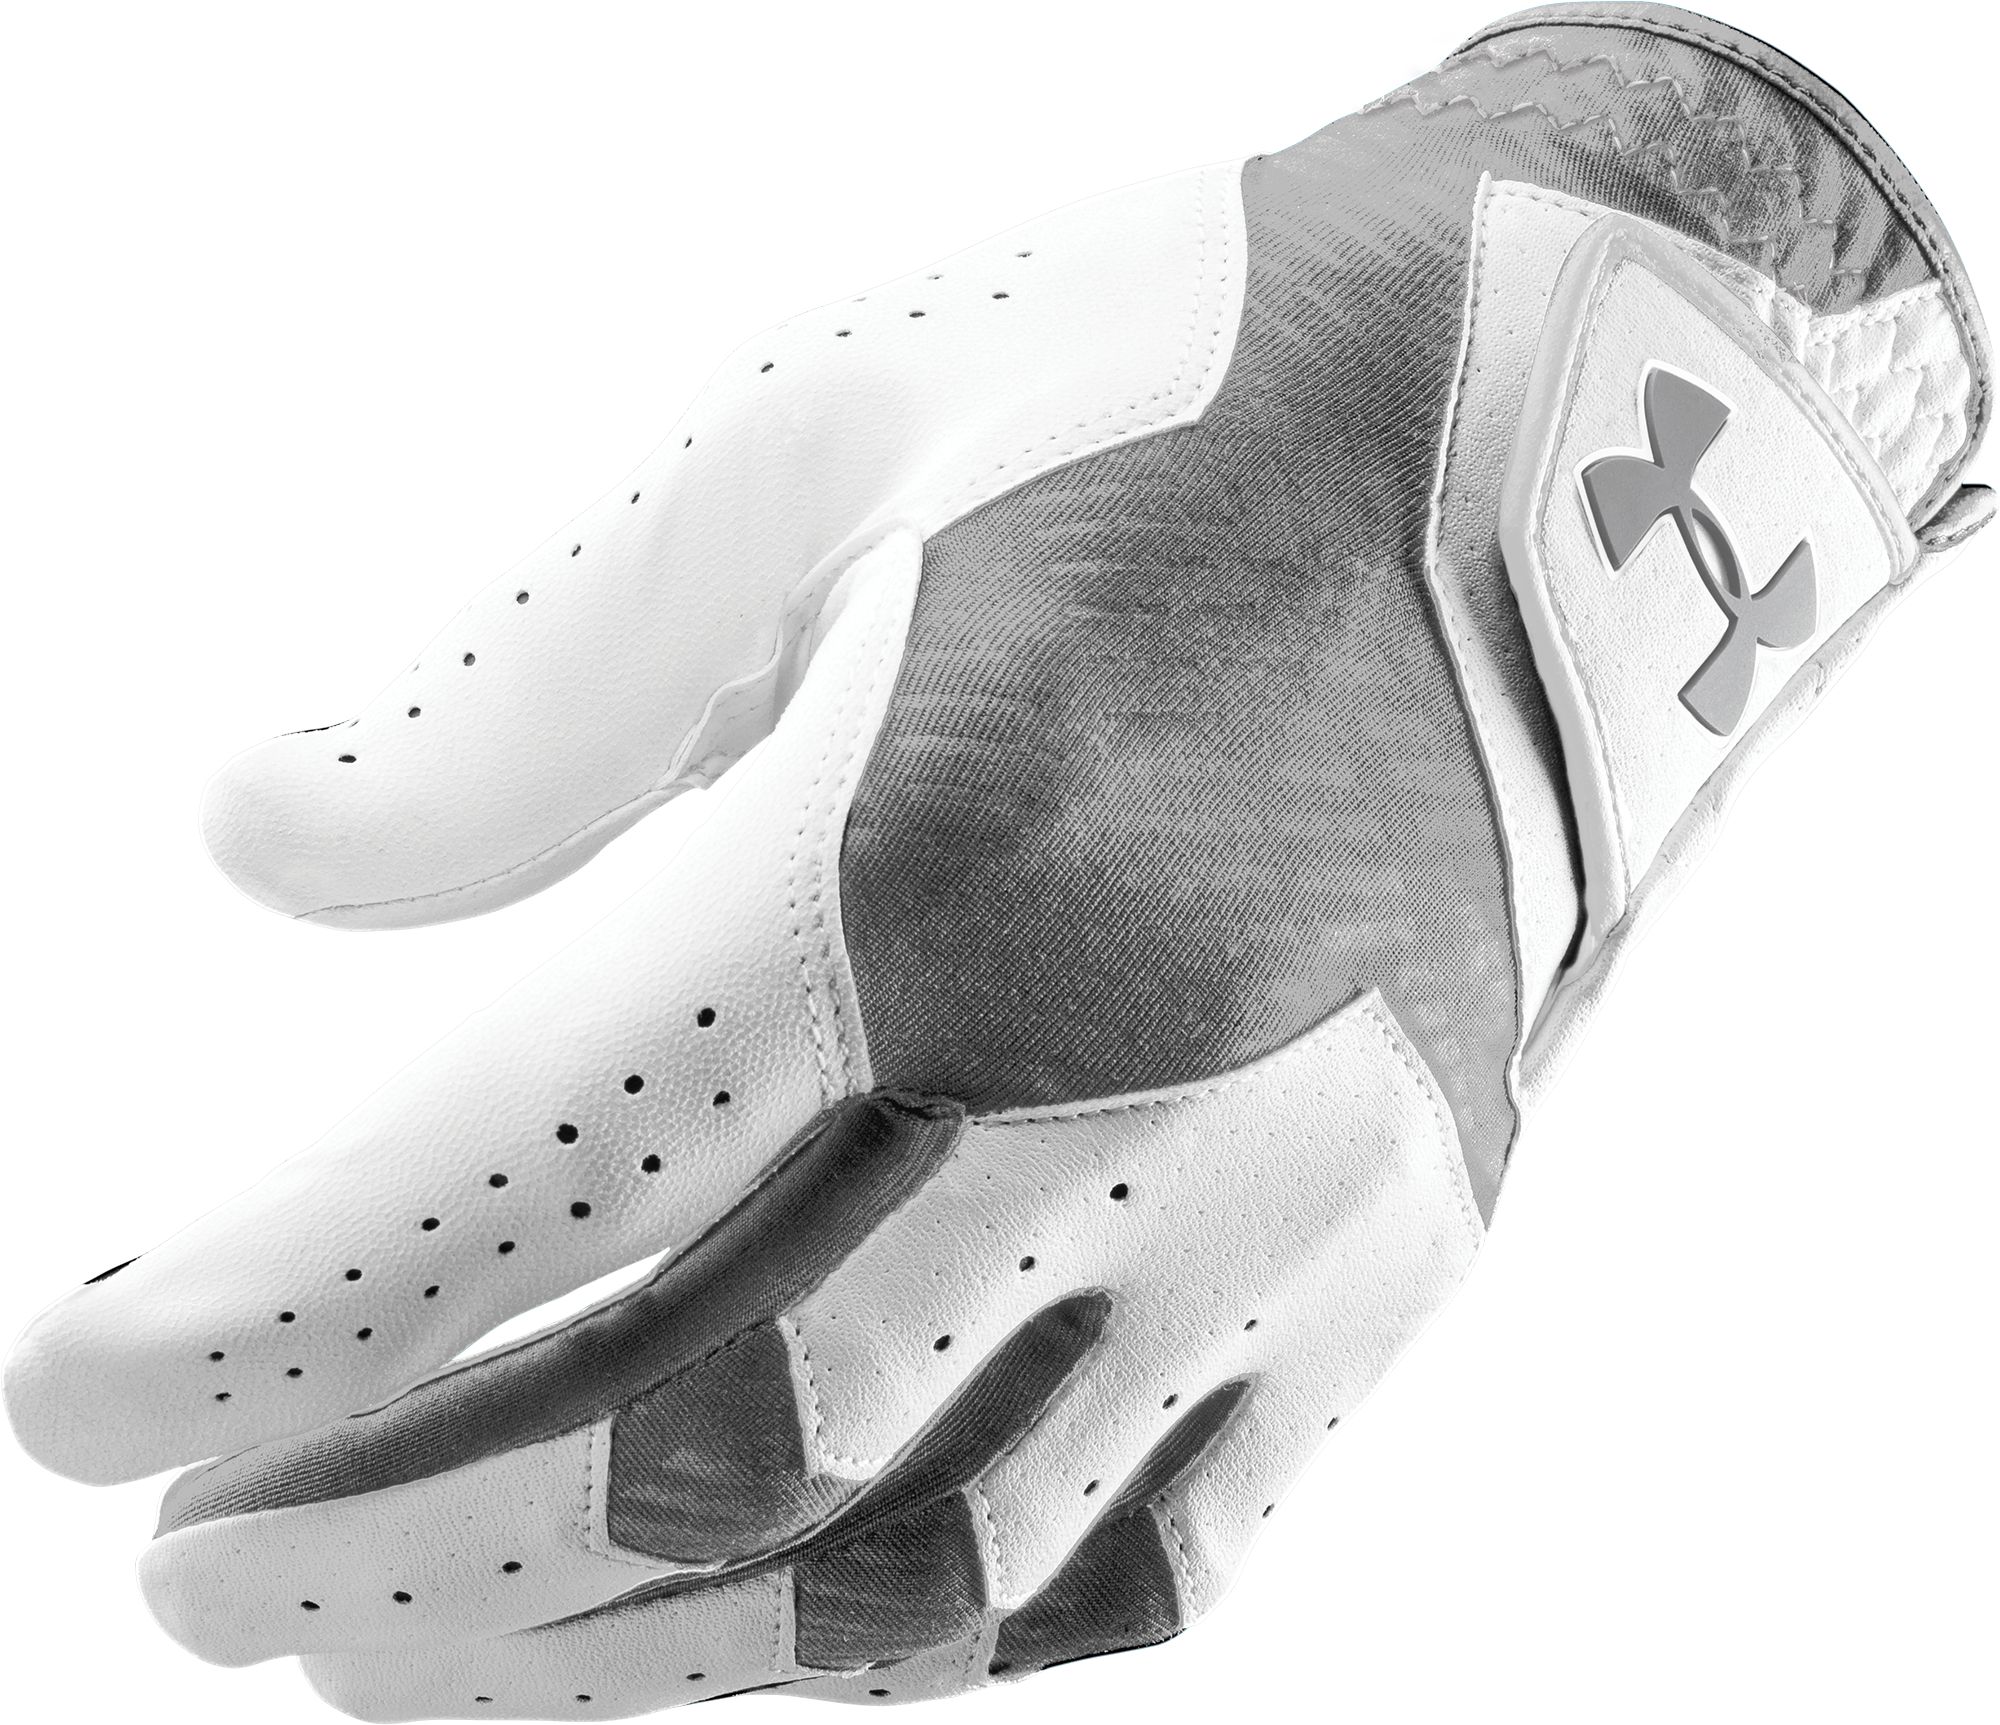 under armour coolswitch golf glove